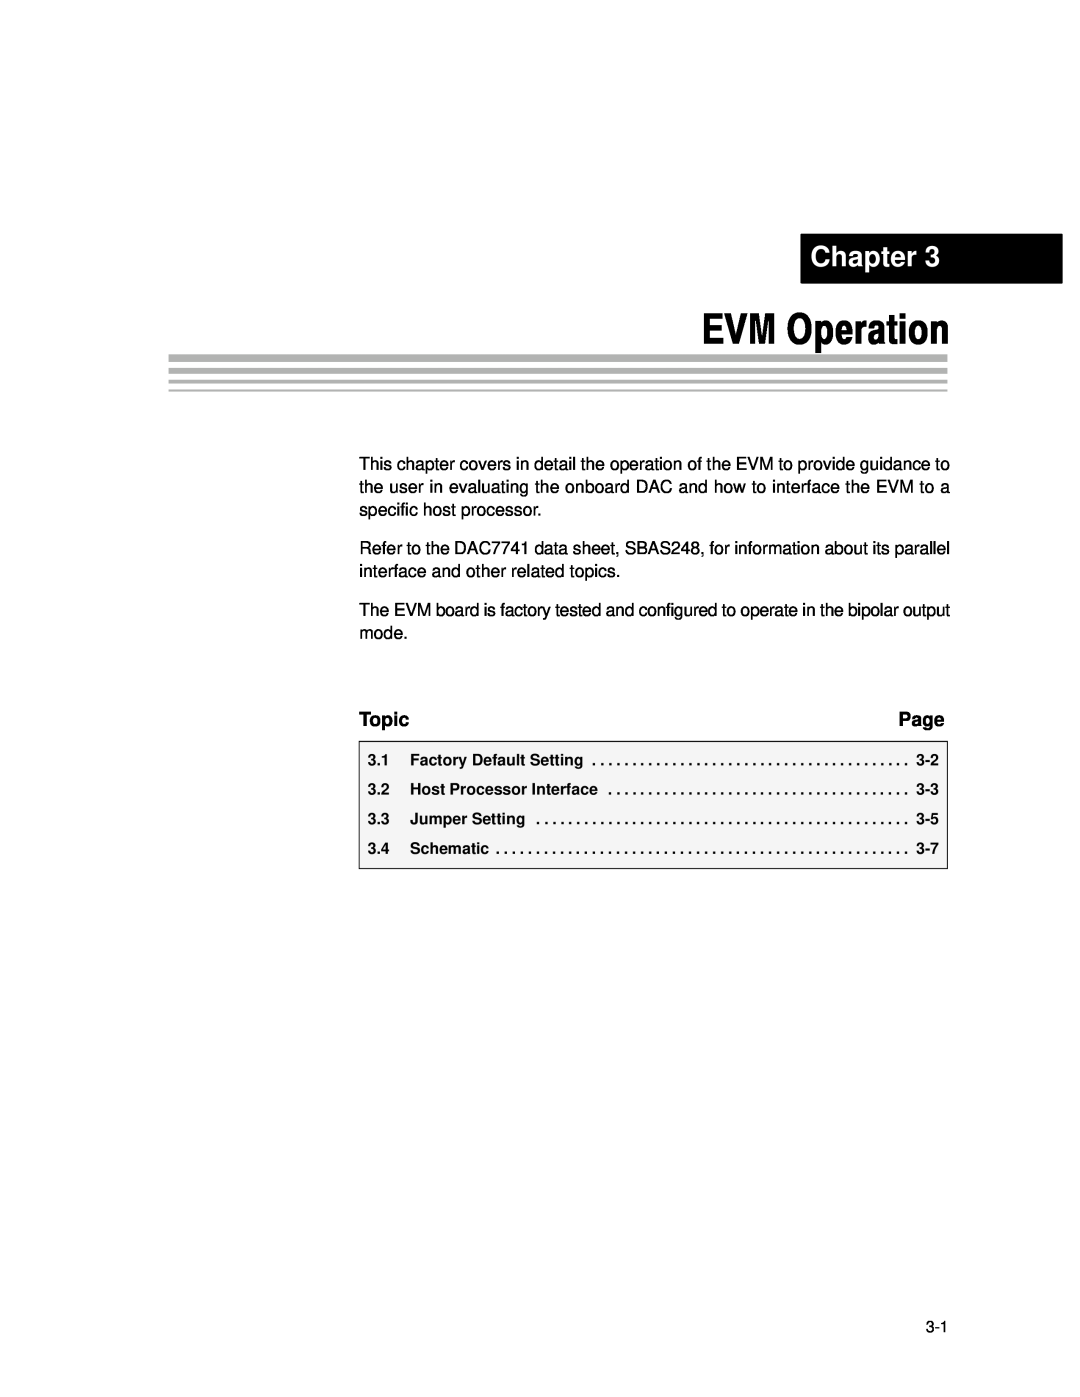 Texas Instruments DAC7741EVM manual EVM Operation, Chapter, Page, Topic 